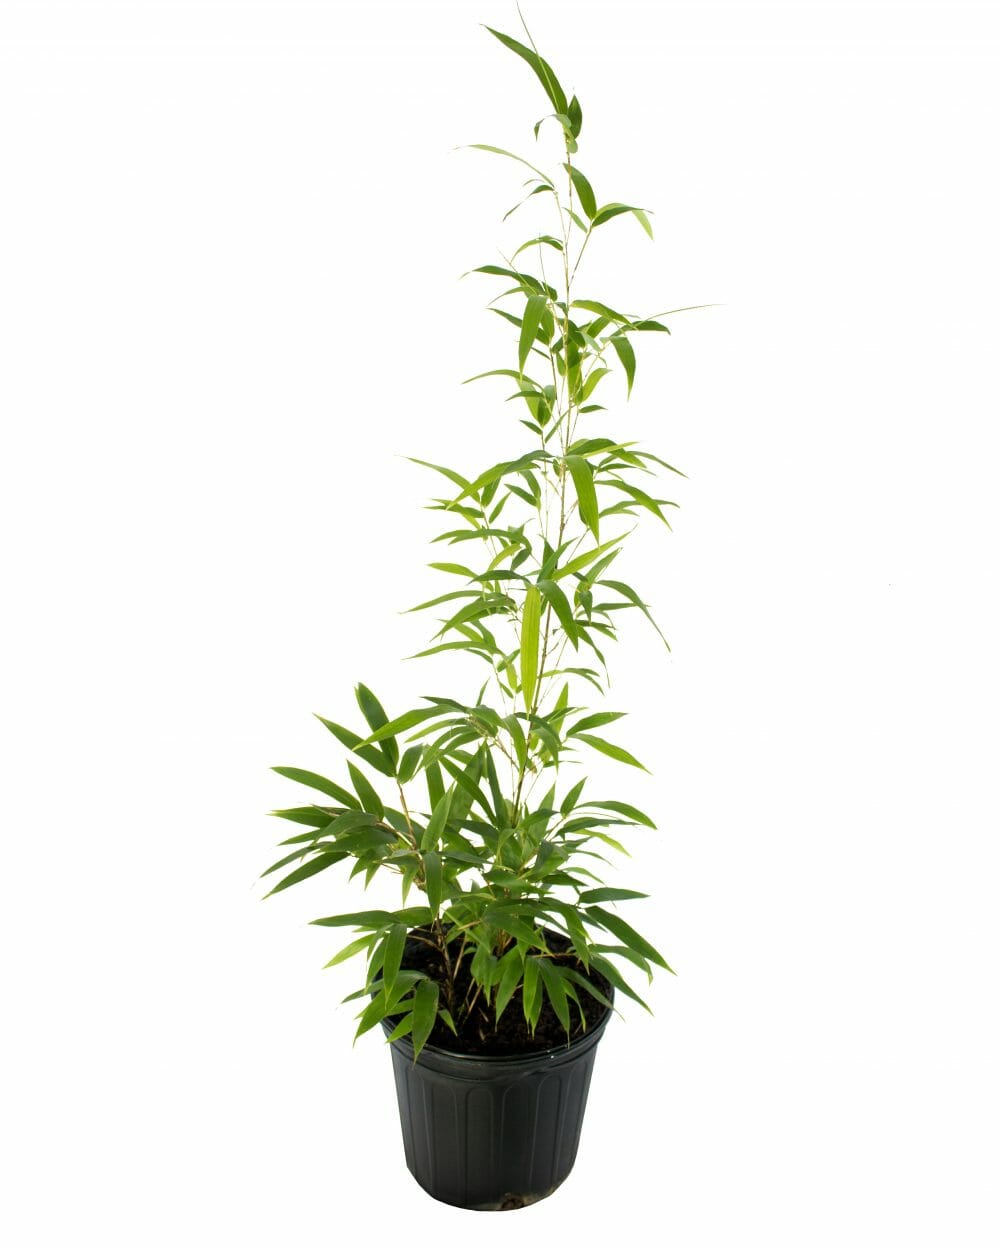 nursery container of black bamboo. green foliage. lush